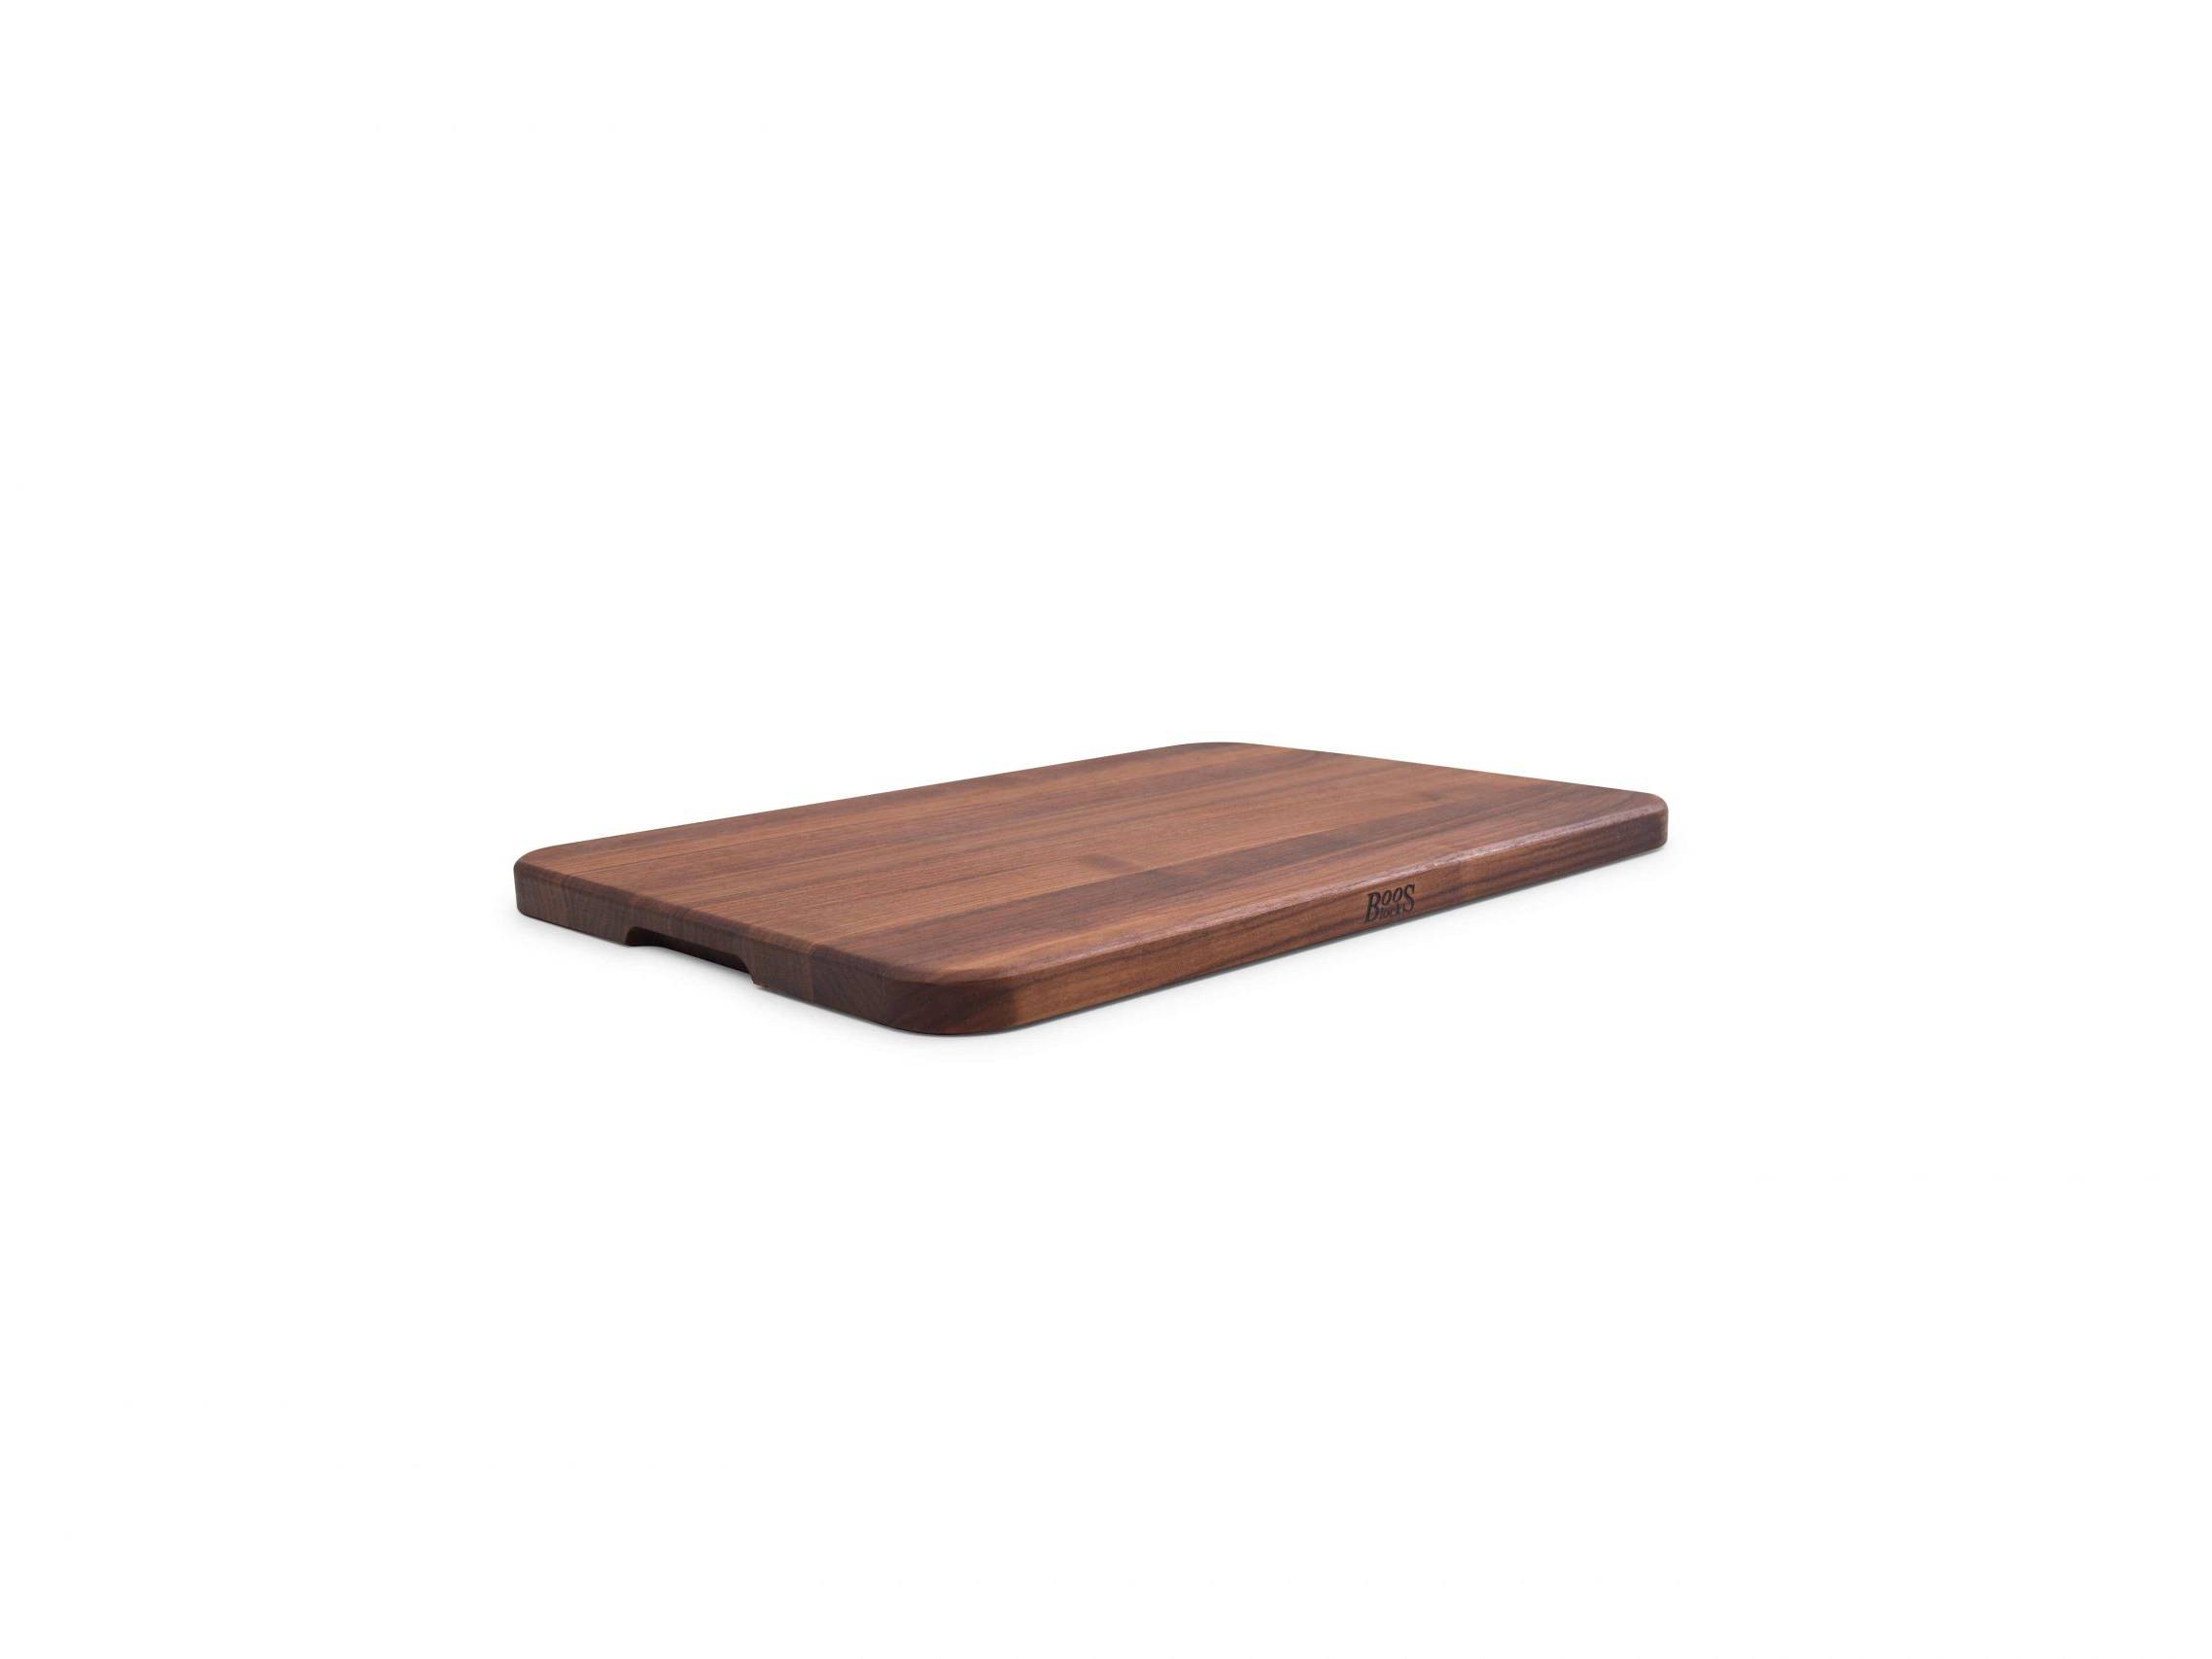 Chop-N-Serve Black Walnut cutting board with recessed handles; can be used on both sides 19